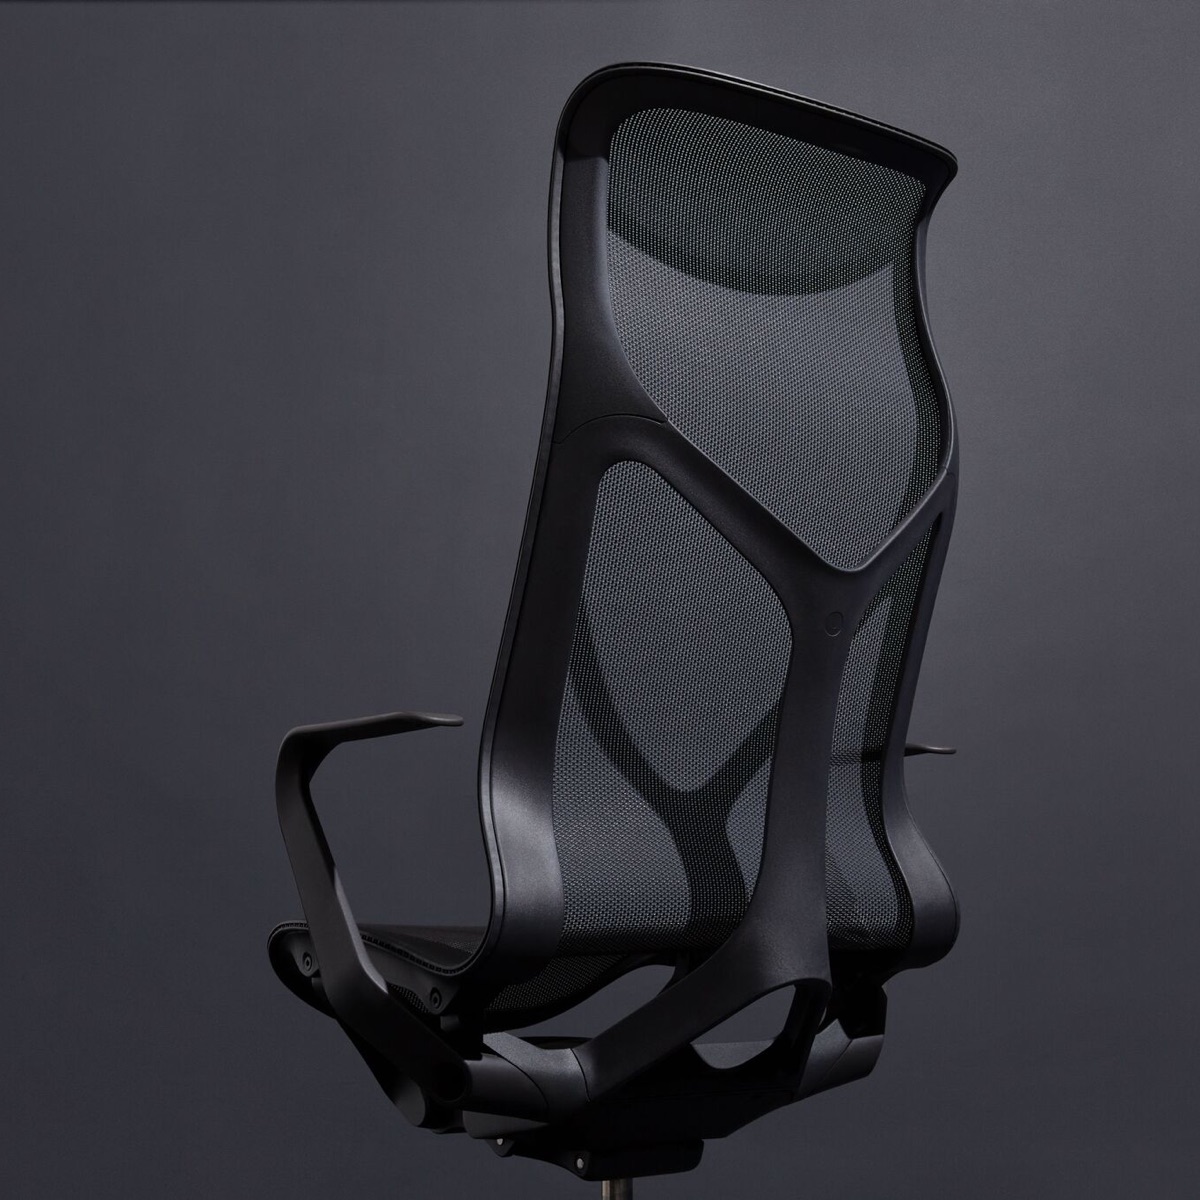 A Graphite dark gray Cosm high-back ergonomic desk chair with fixed arms on a dark gray background.